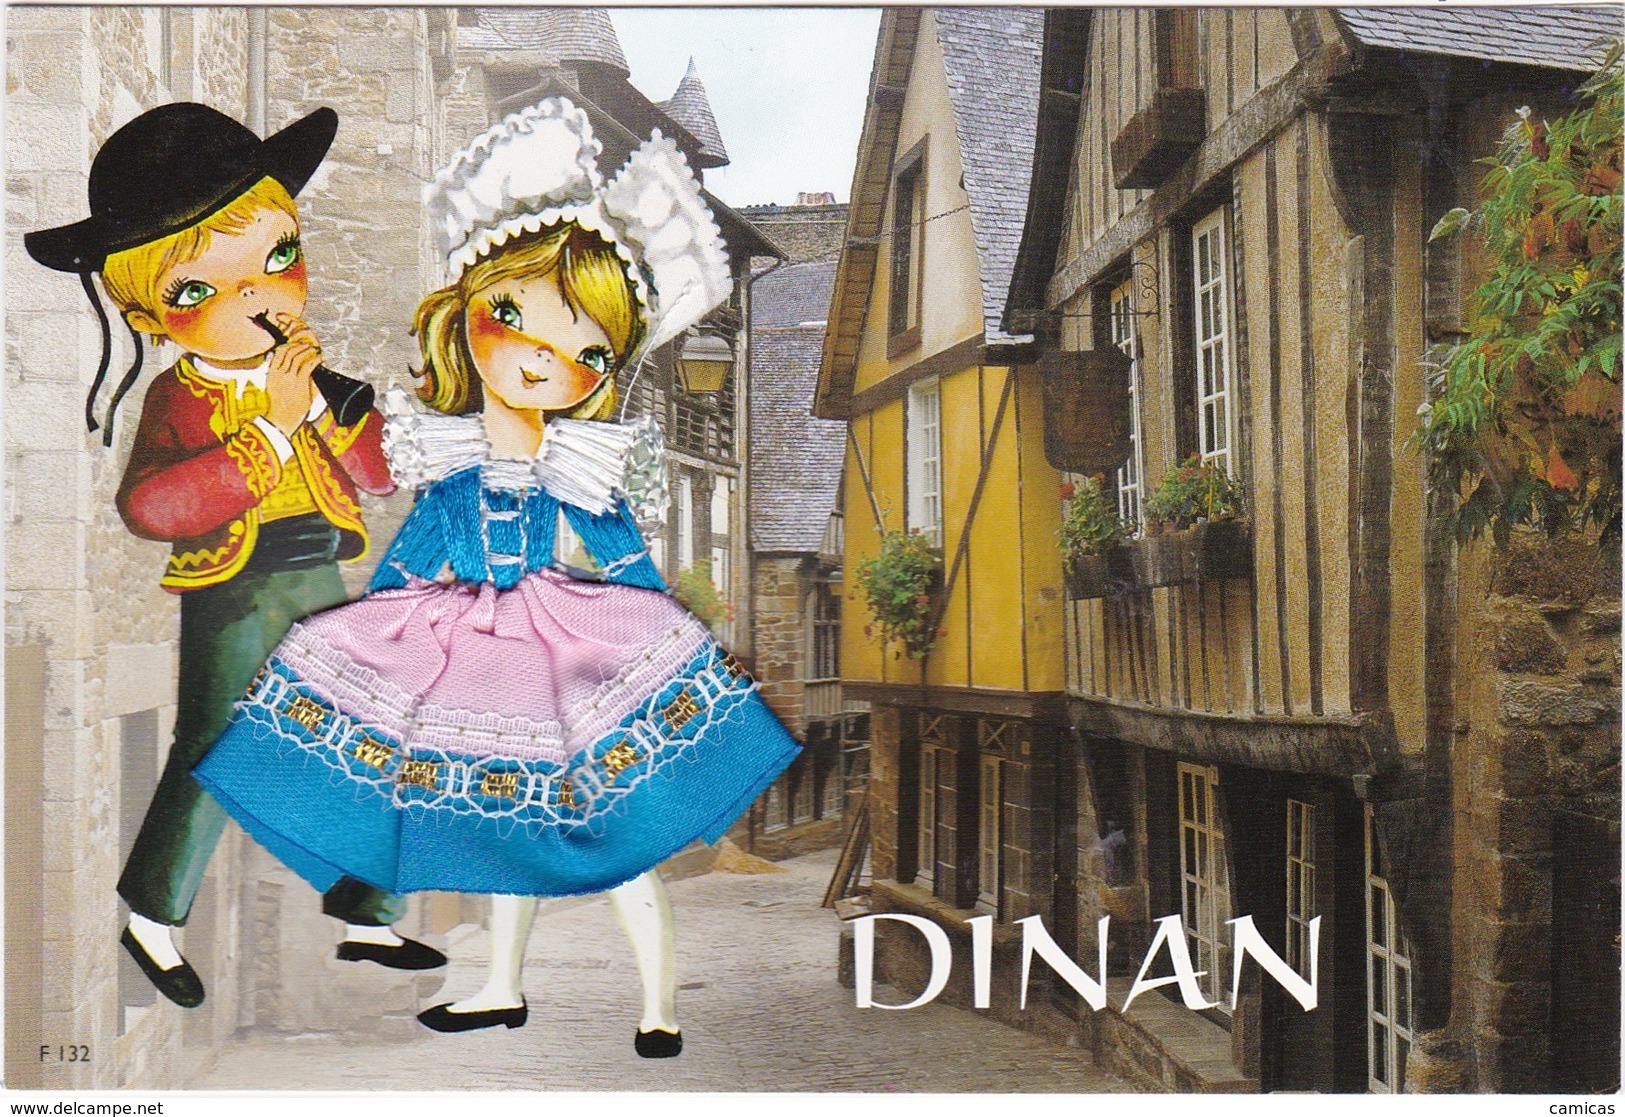 CARTE BRODEE: DINAN - Embroidered